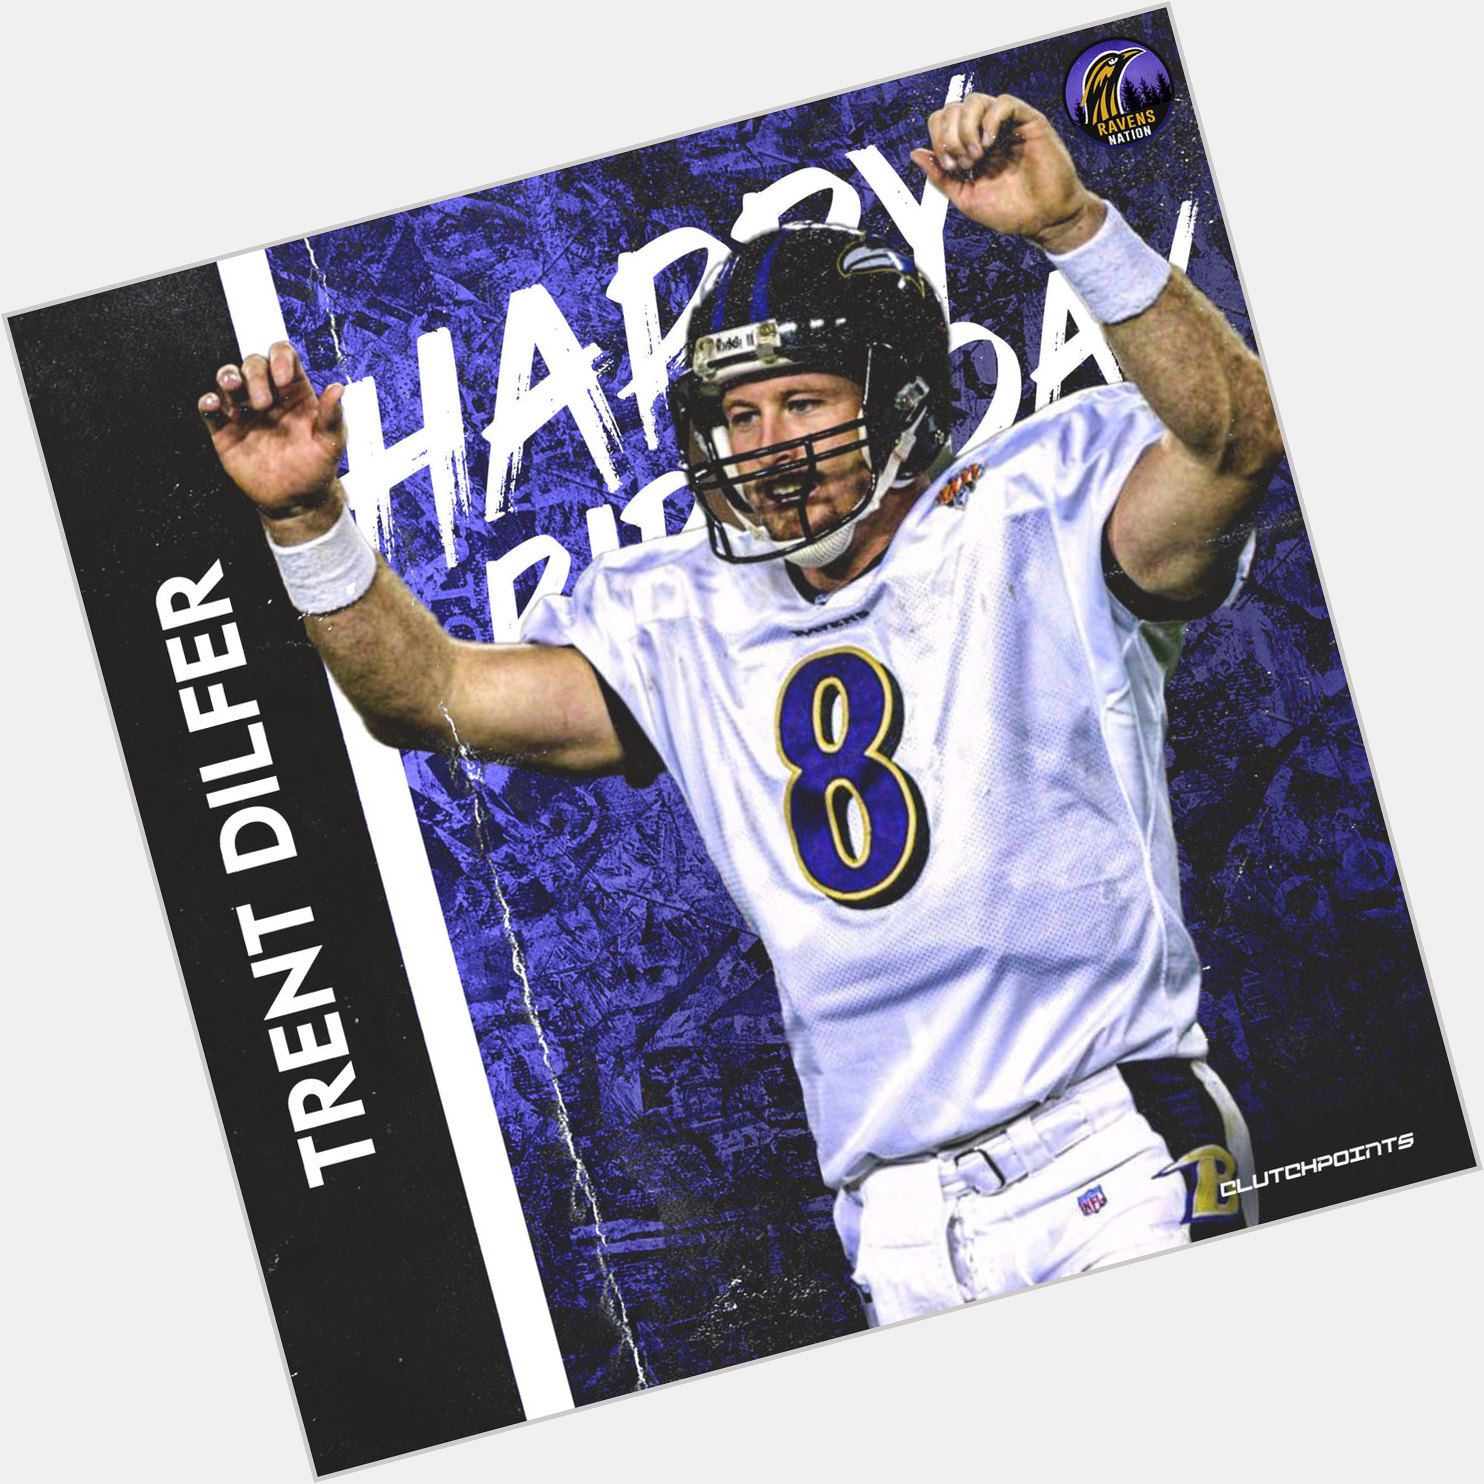 Join Ravens Nation as we wish Trent Dilfer a happy 50th birthday! 